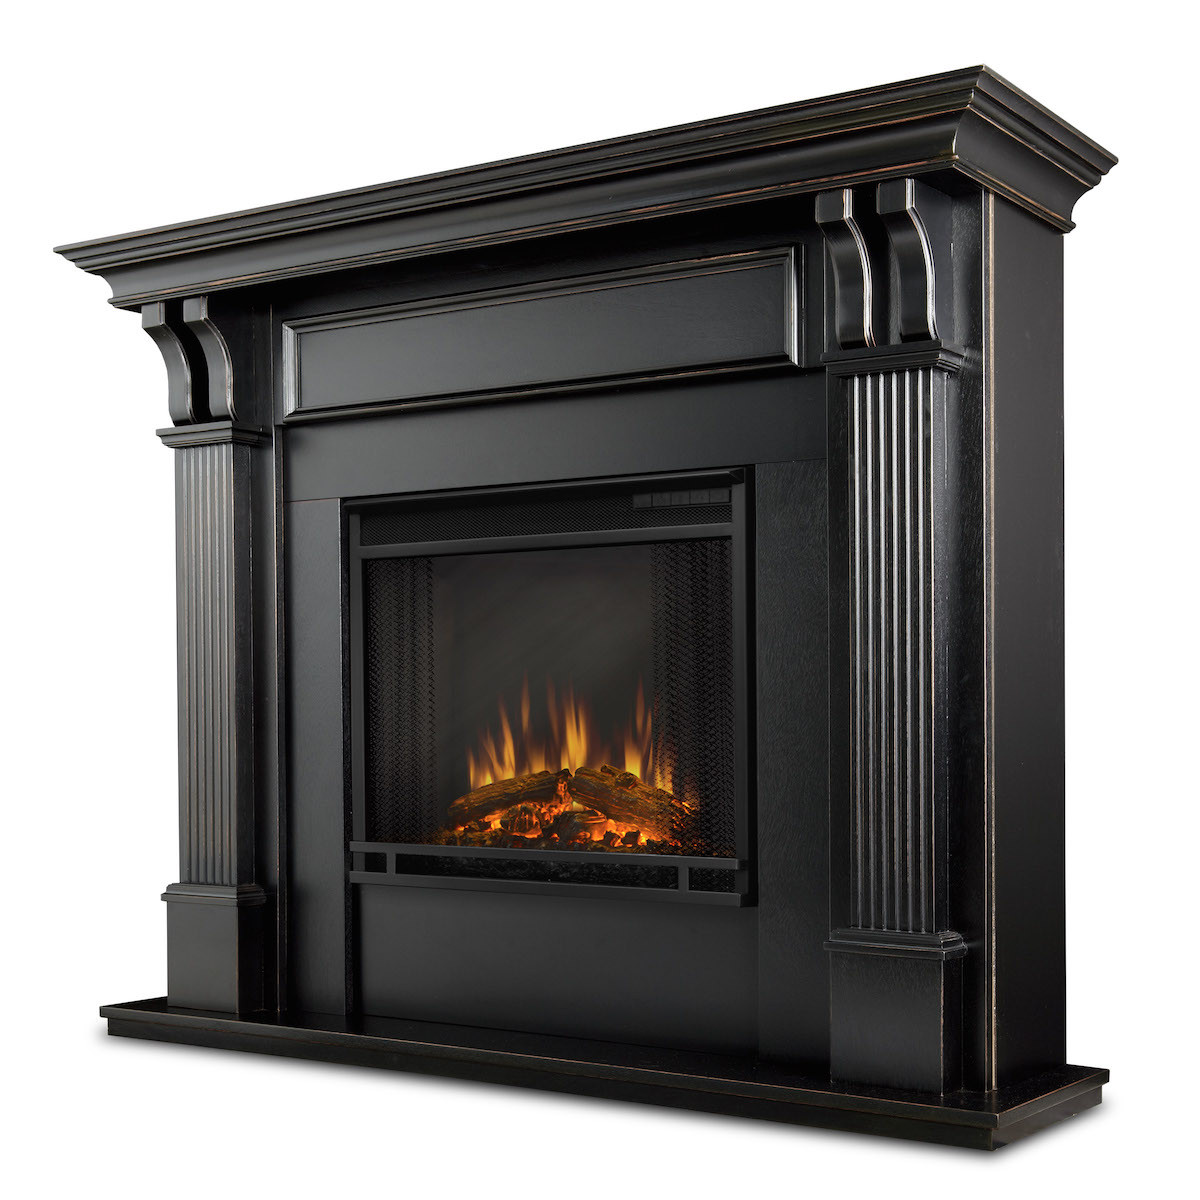 Black Electric Fireplace
 Real Flame Ashley Indoor Electric Fireplace in Black Wash